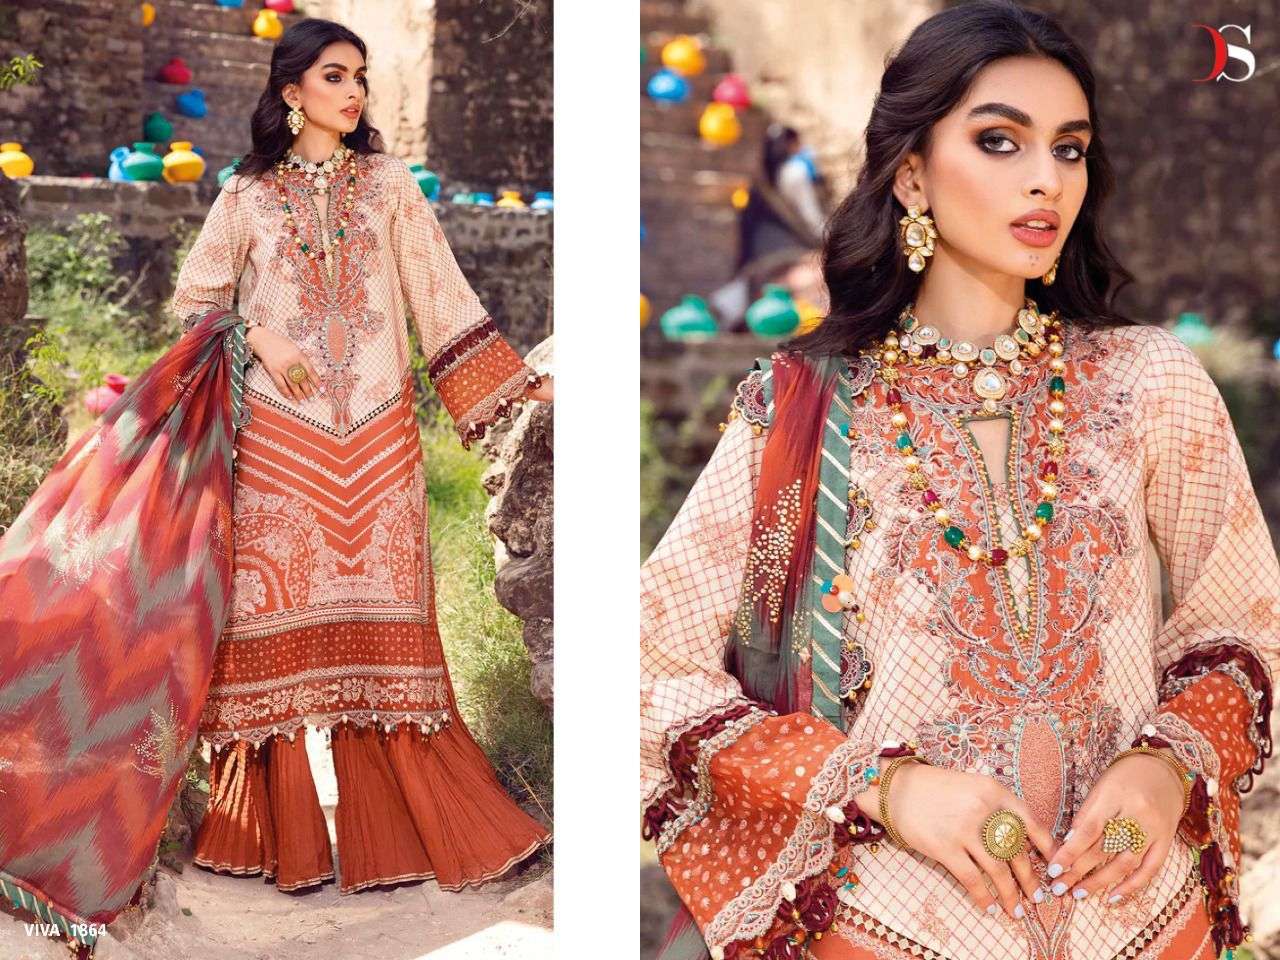 deepsy suits viva anaya 1861-1867 series pure cotton embroidery suits wholesale price 